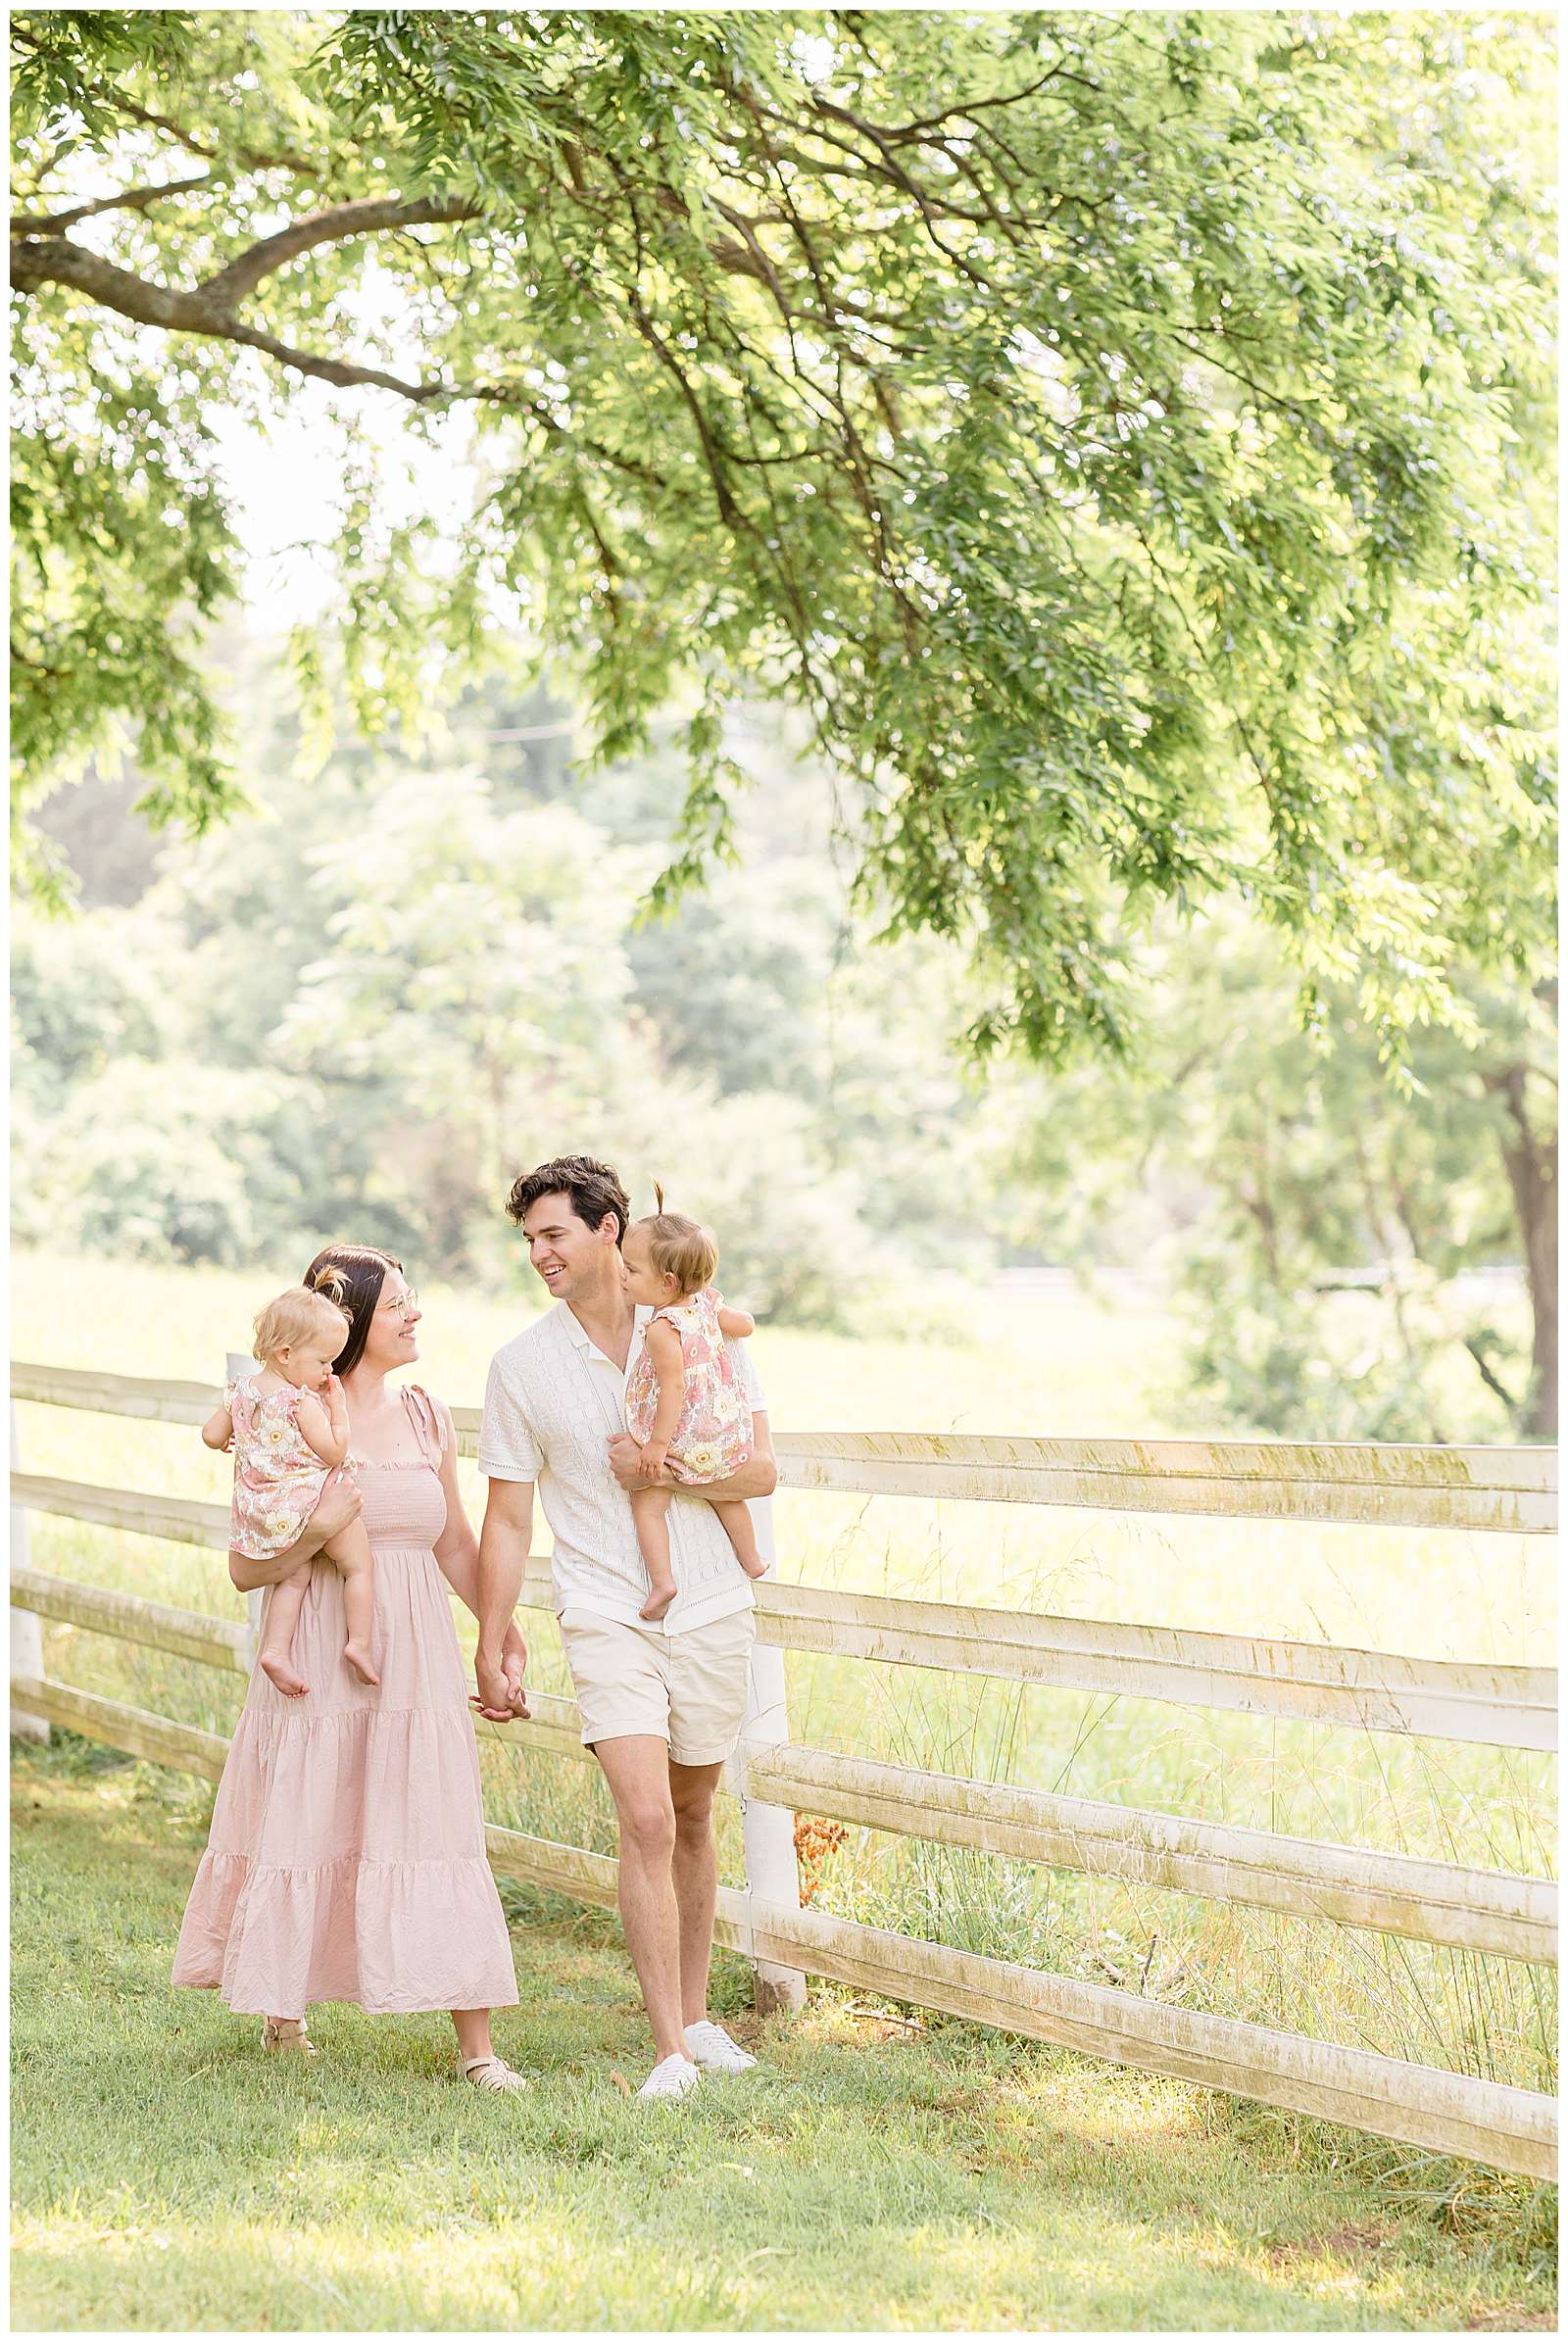 Mom and Dad hold hands and look at each other as they each hold their 1 year old twin daughters and walk along a white fence link surrounded by green grass and trees in Nashville for their family portraits! Click to see more photography education from Rebecca Rice Photography on the blog today! -rebeccaricephoto.com